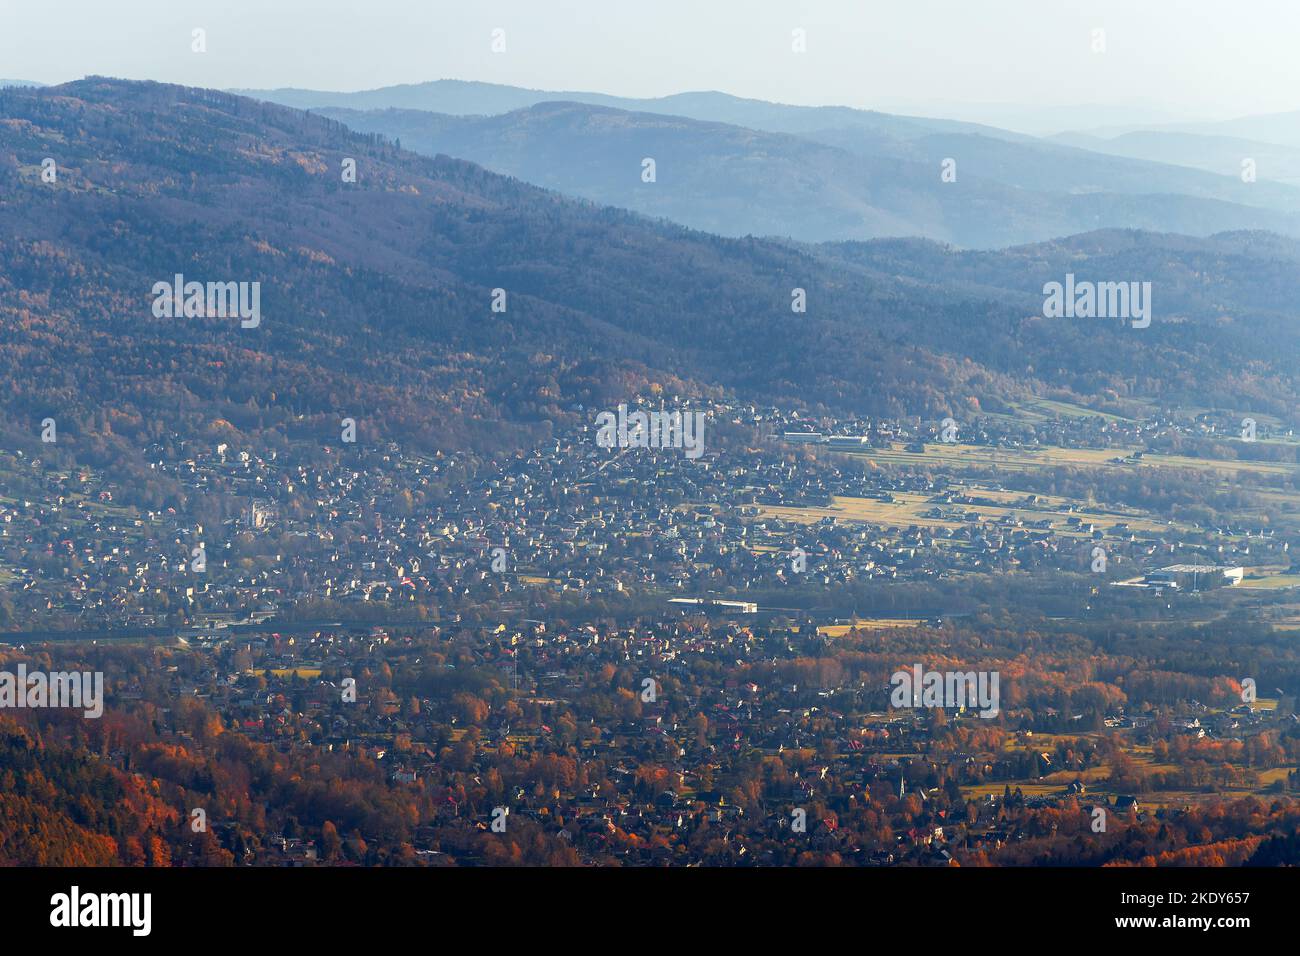 A beautiful view towards the Little Beskids and the village of Wilkowice from the observation tower on the Szyndzielnia mountain. Autumn morning. Pola Stock Photo